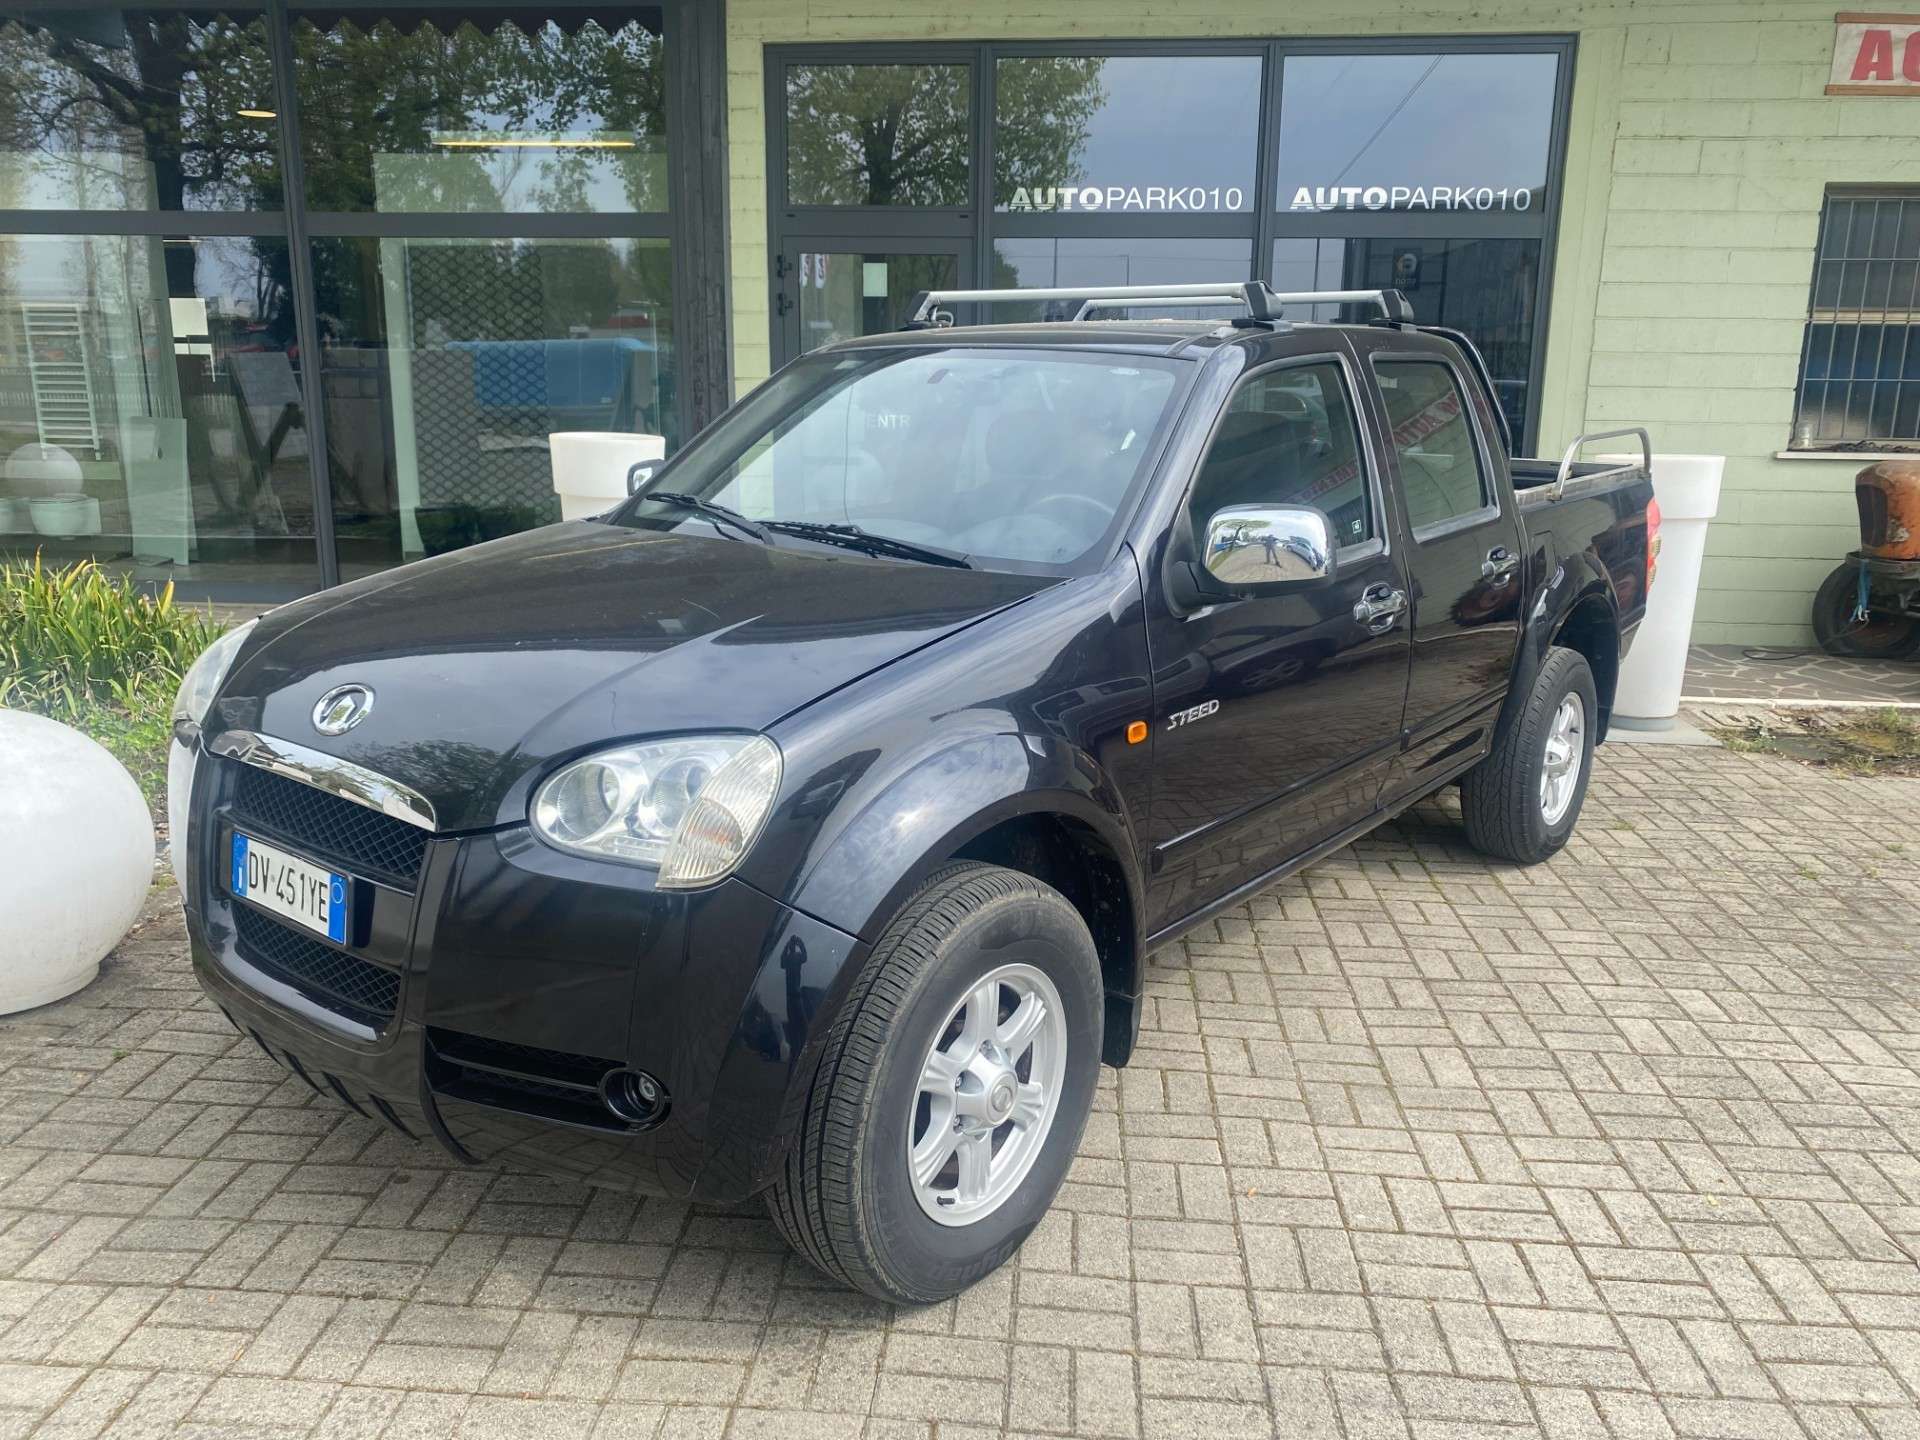 Great Wall Steed Off-Road/Pick-up in Black used in Cremona - Cr for € 5,900.-